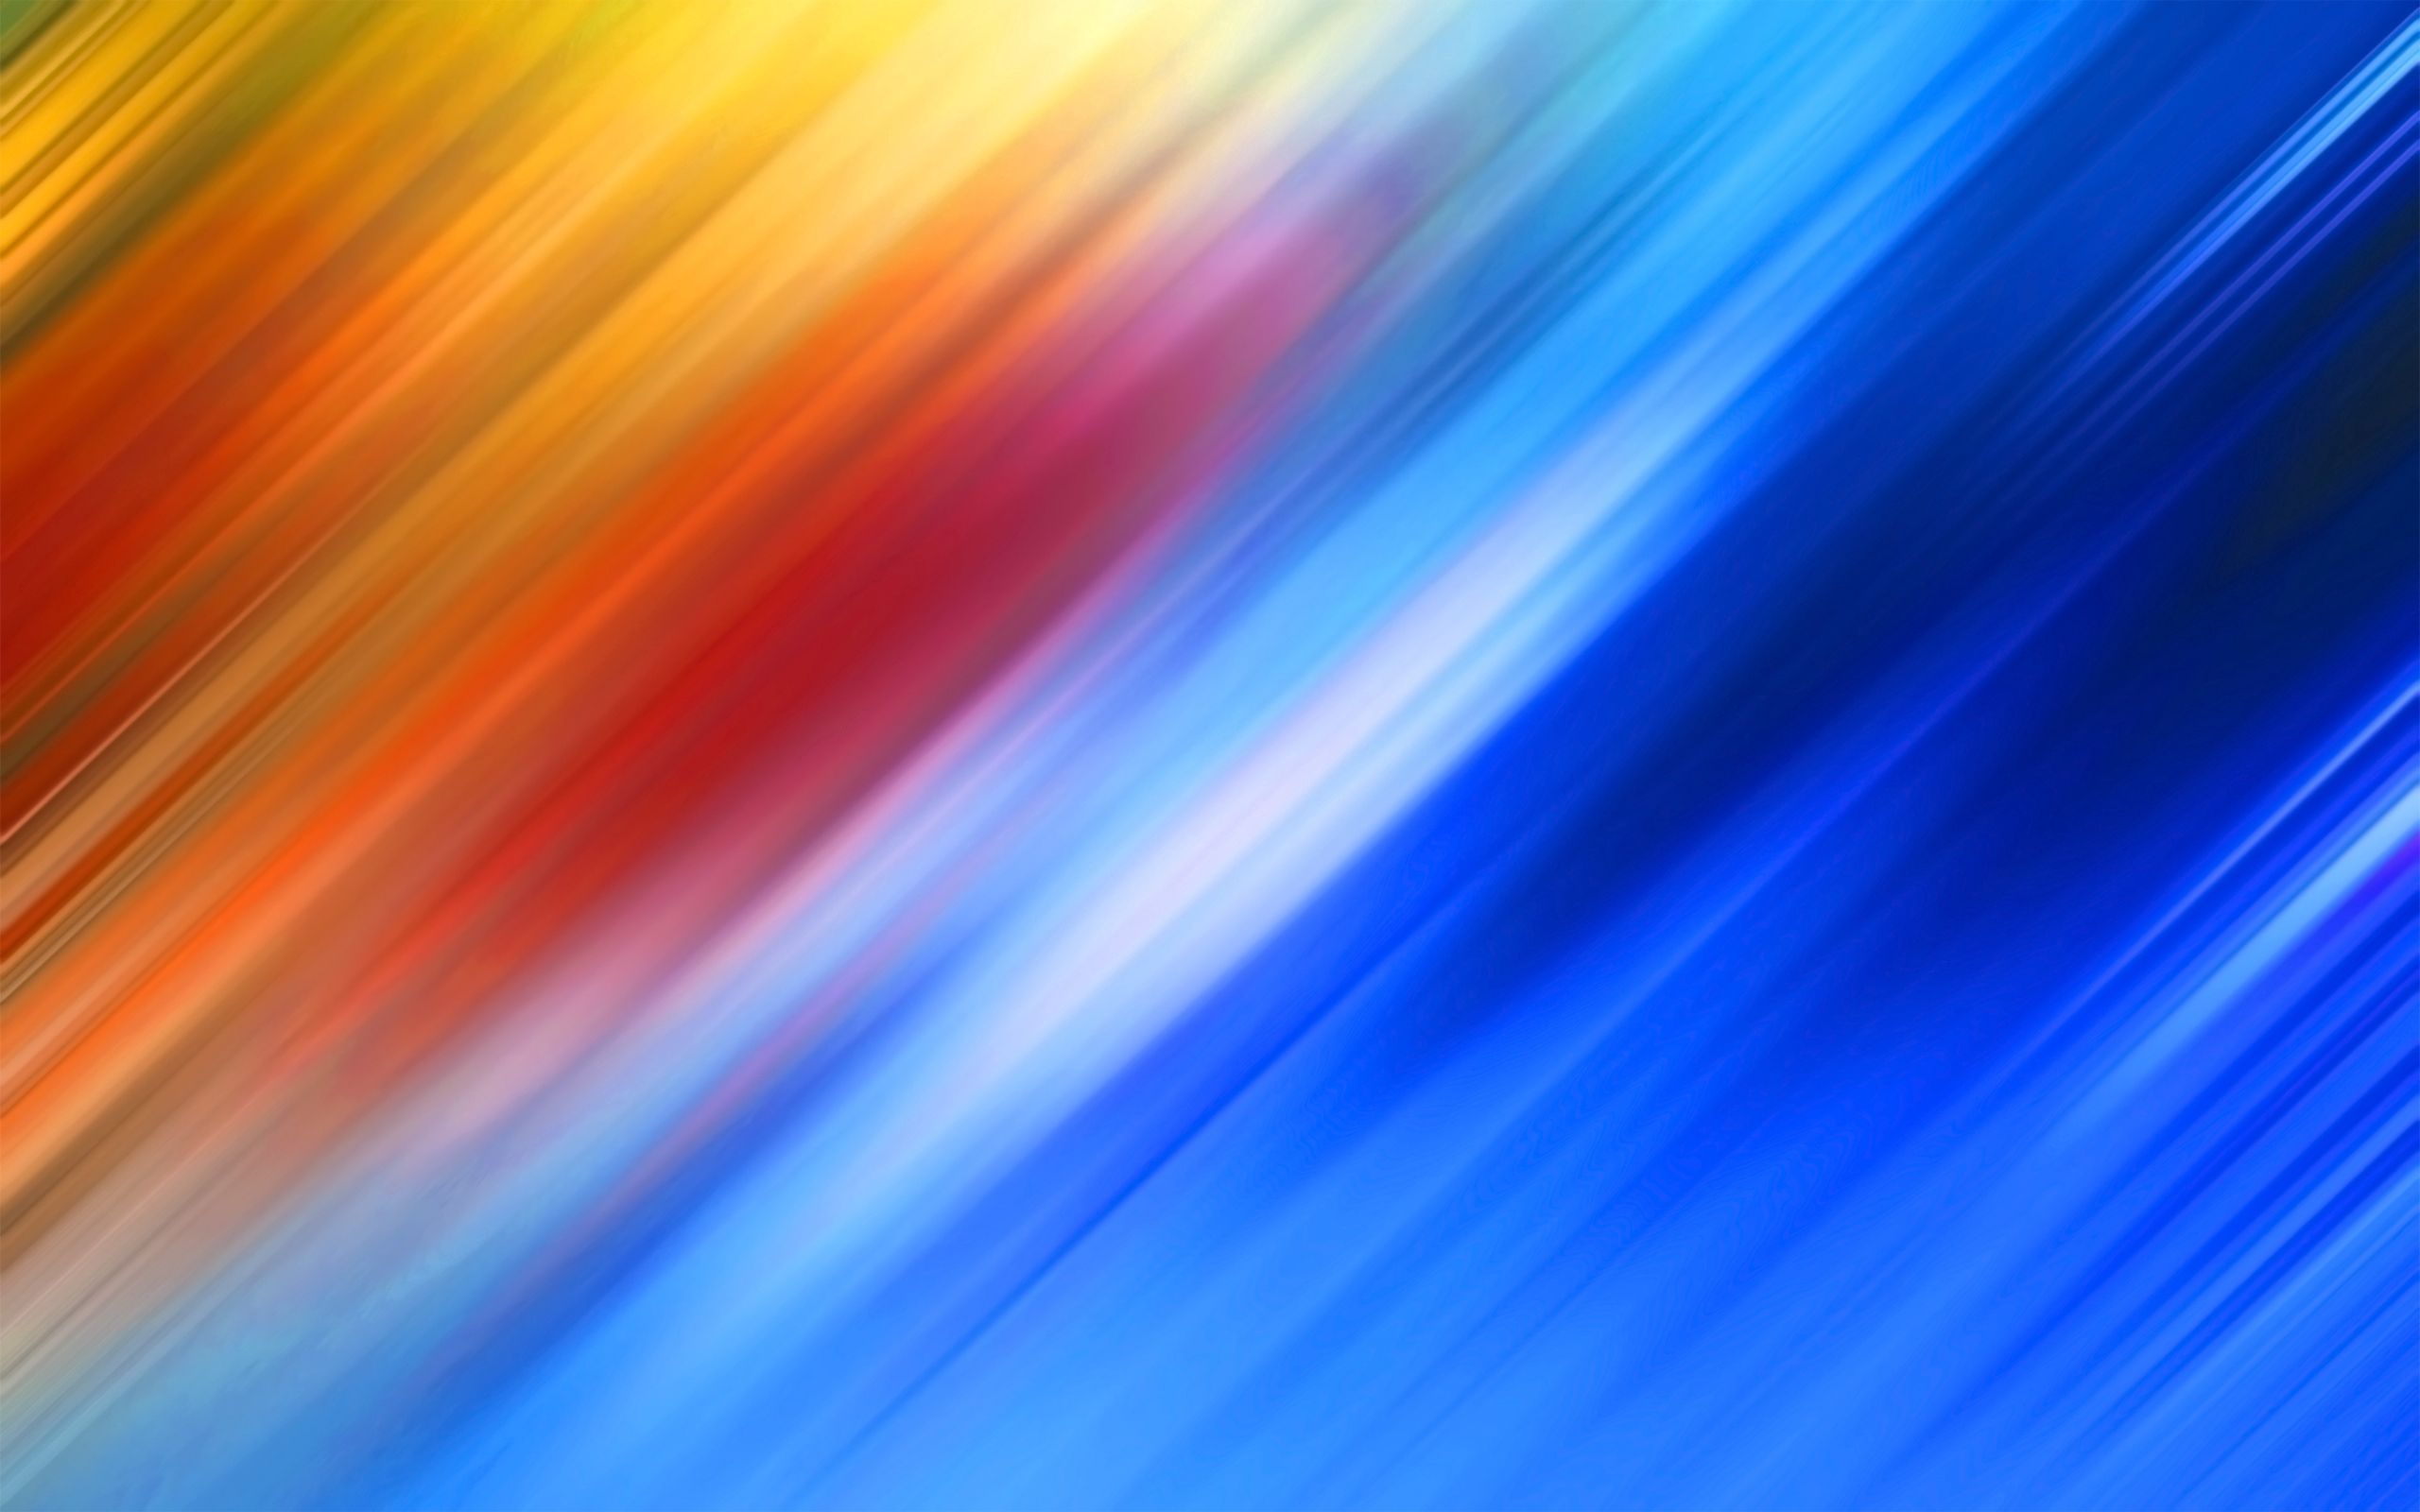 95007 download wallpaper multicolored, abstract, background, lines, motley, obliquely screensavers and pictures for free